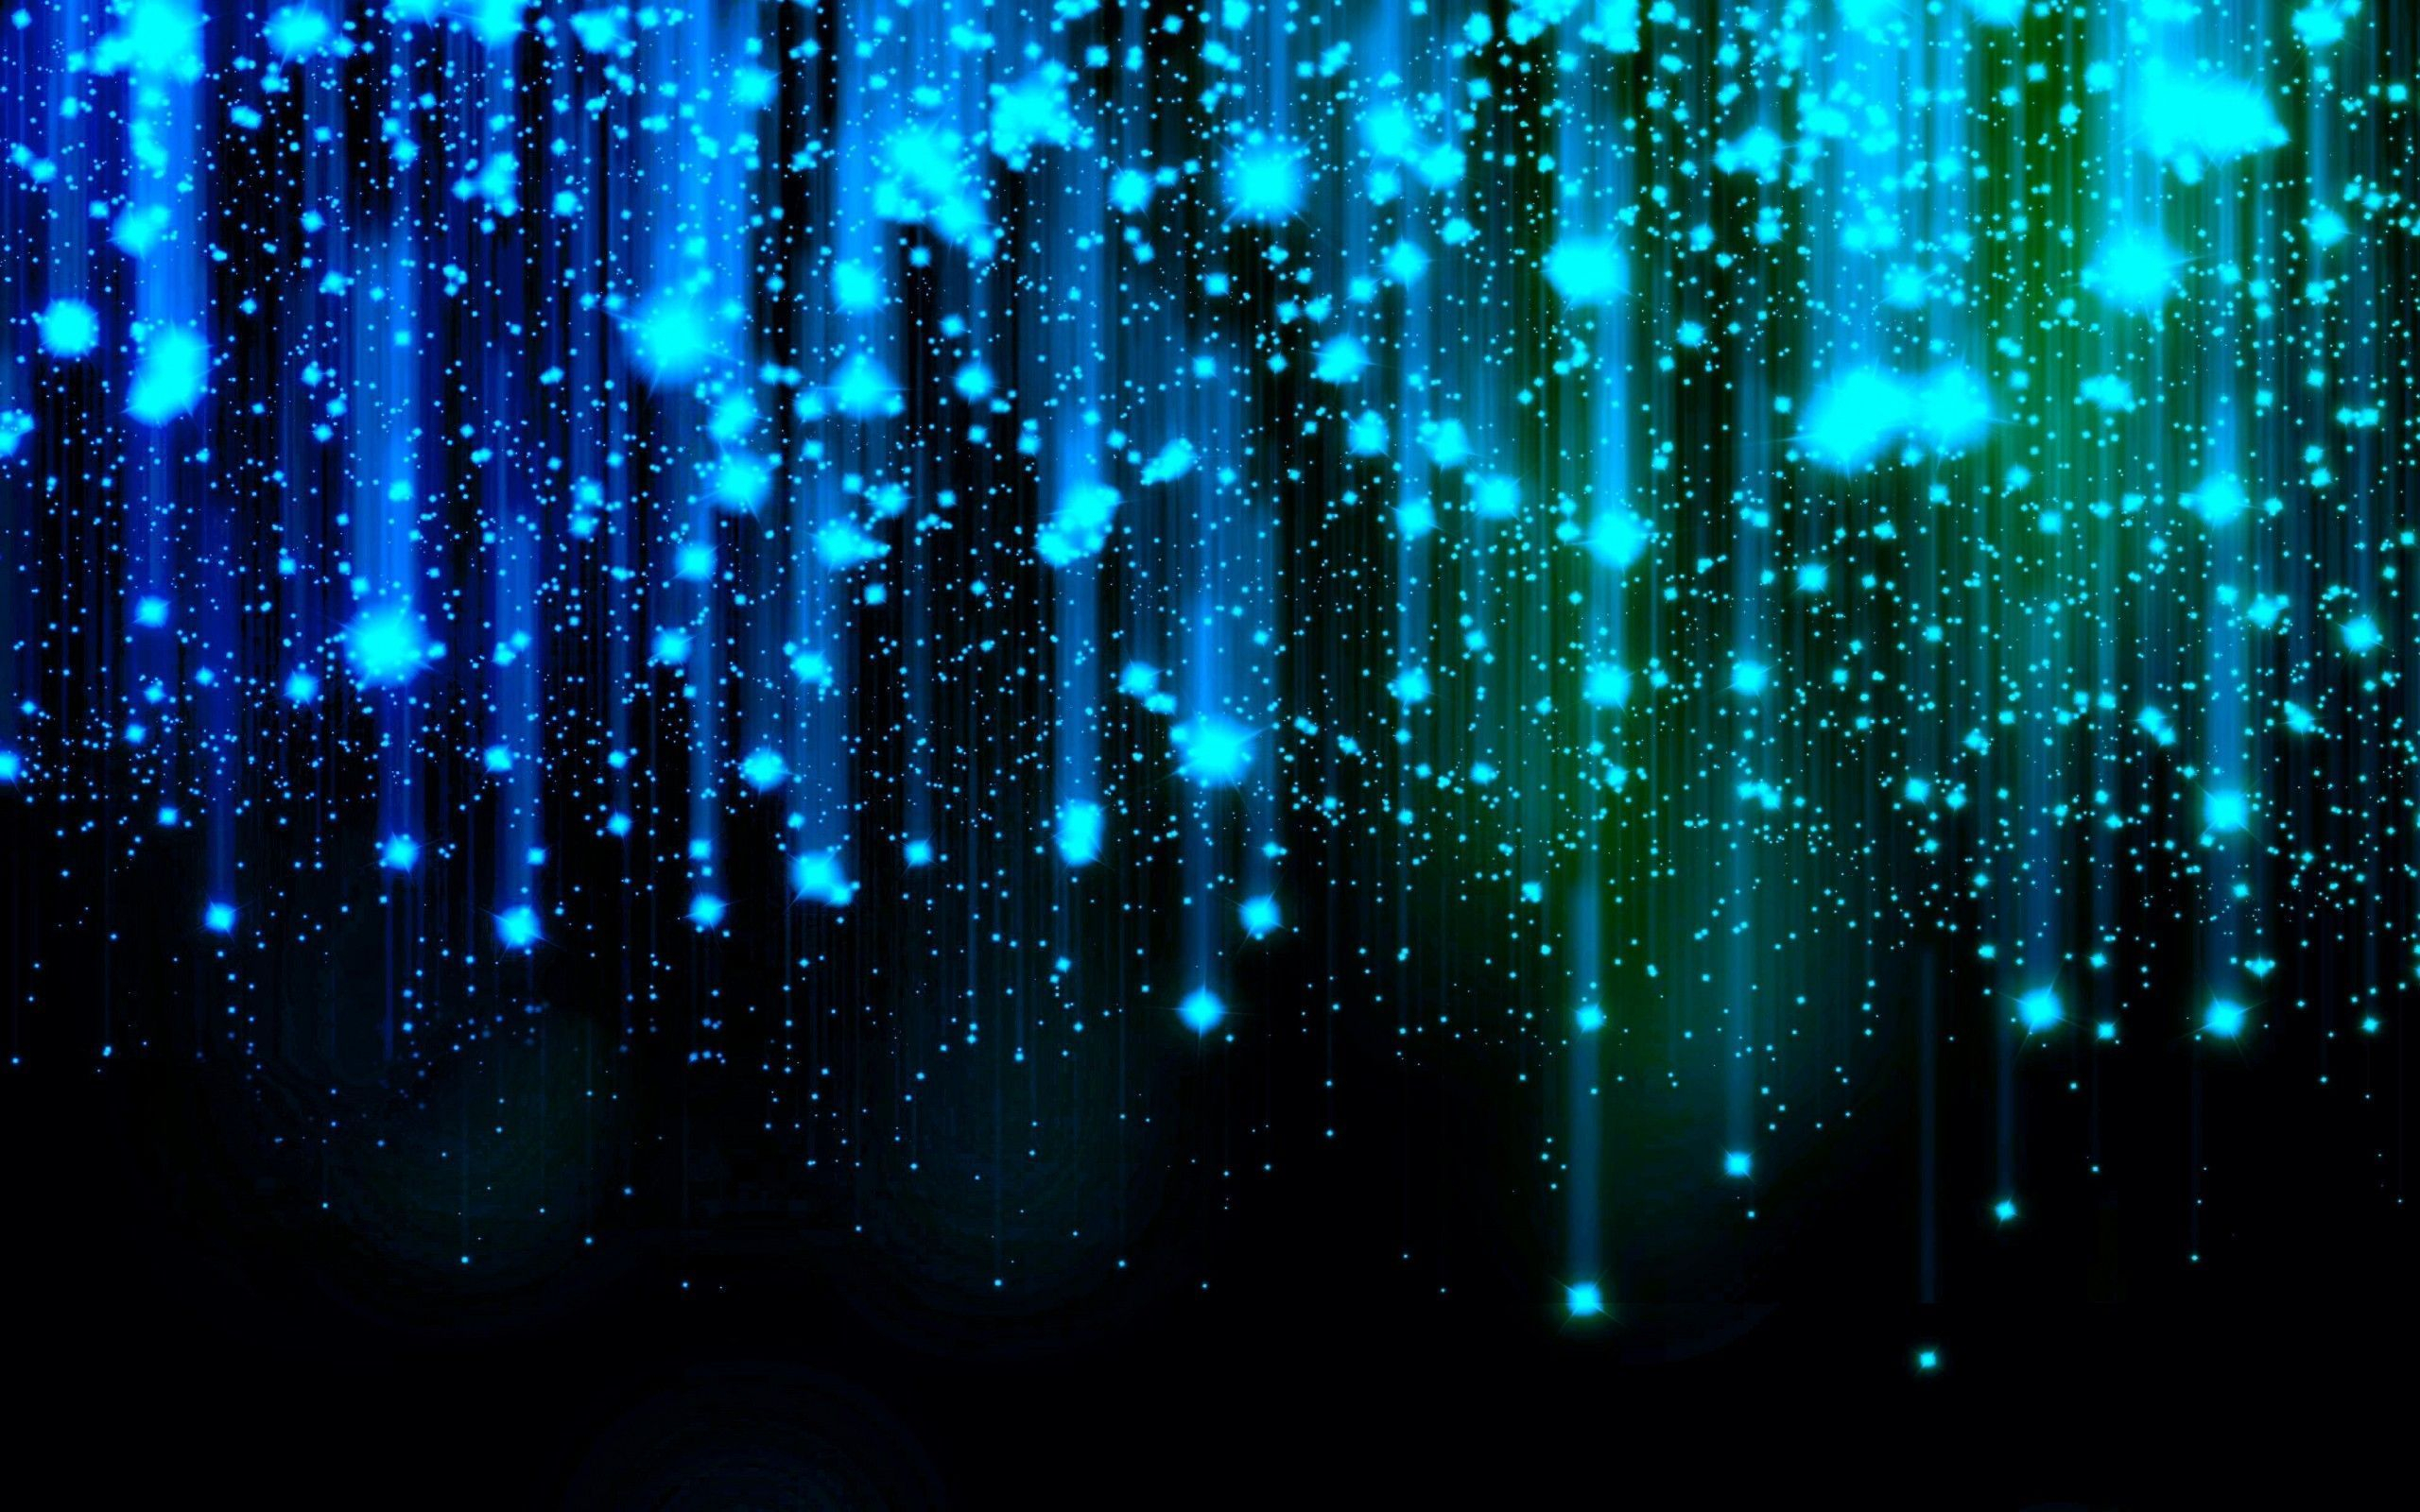 10 Most Popular Black And Light Blue Wallpaper FULL HD 1920×1080 For PC